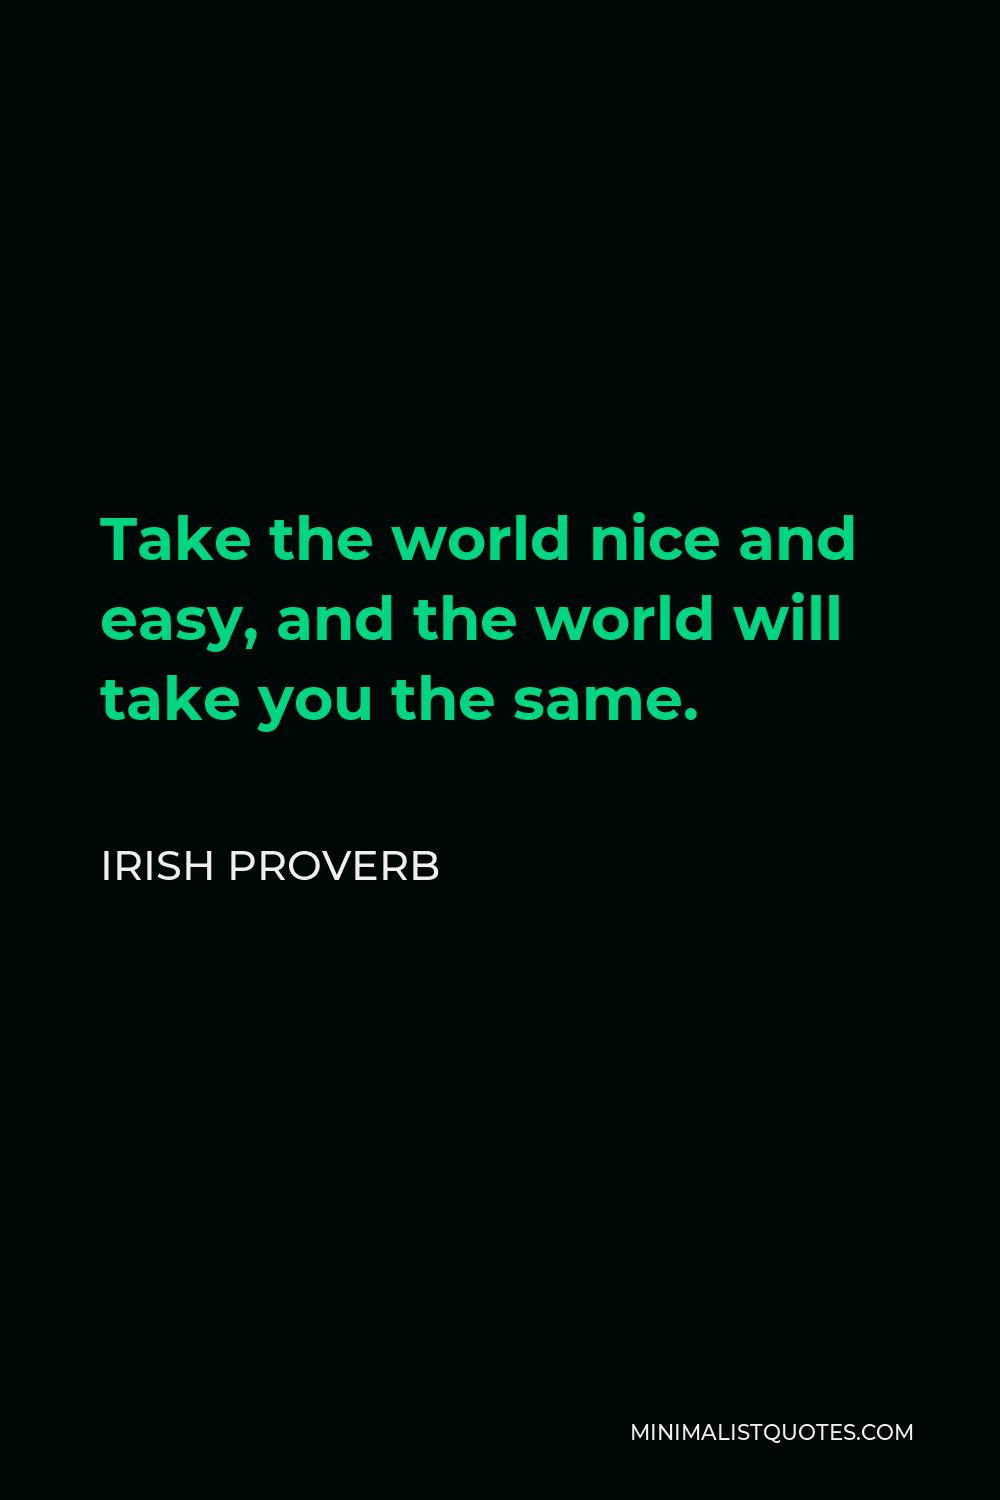 Irish Proverb Quote - Take the world nice and easy, and the world will take you the same.